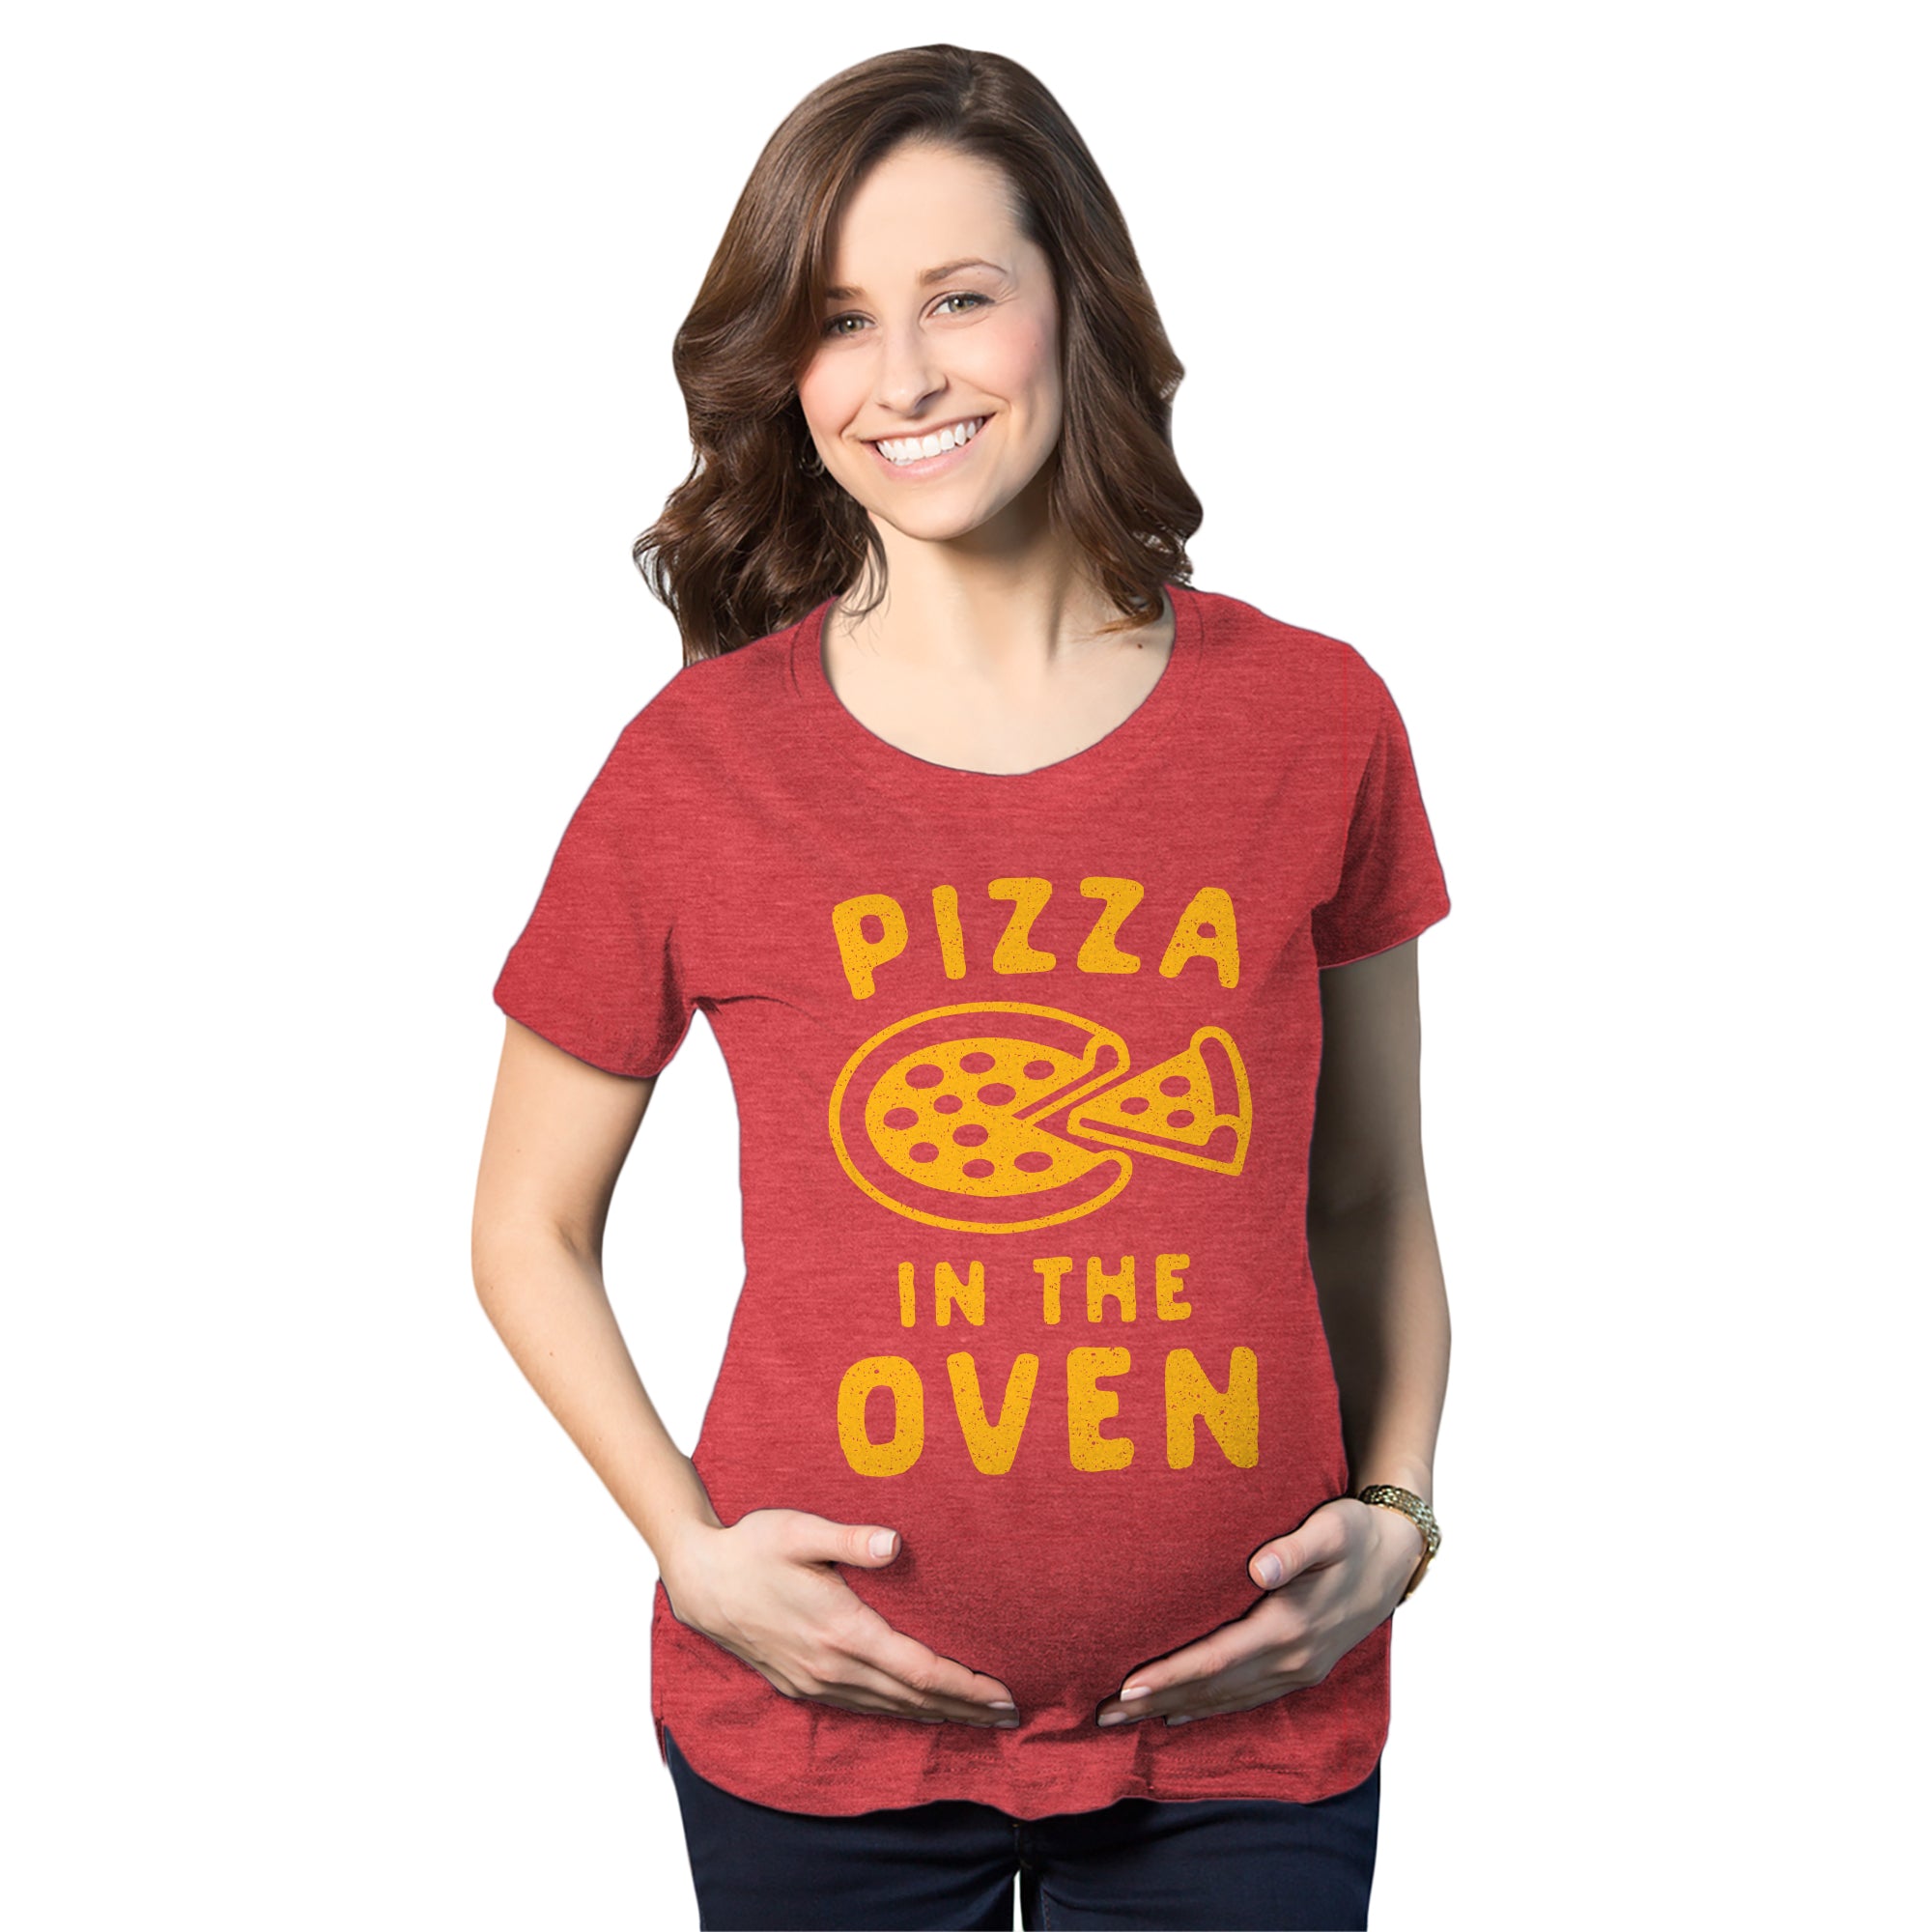 Funny Heather Red Pizza In The Oven Maternity T Shirt Nerdy Food Tee